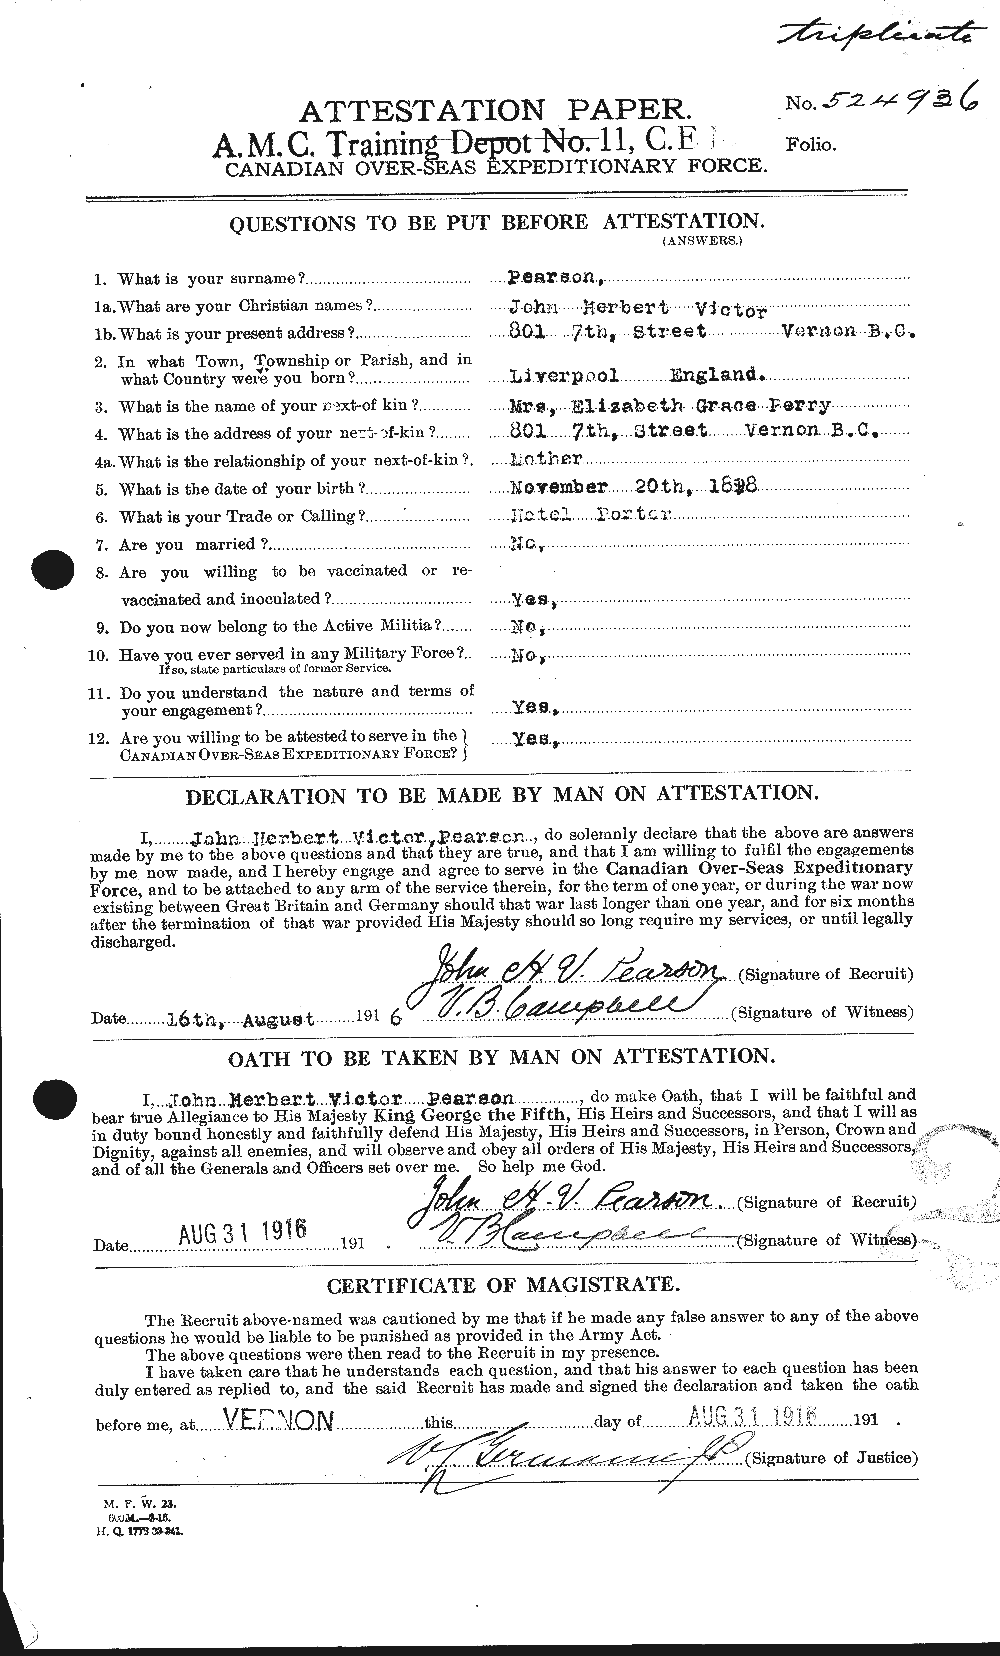 Personnel Records of the First World War - CEF 571103a